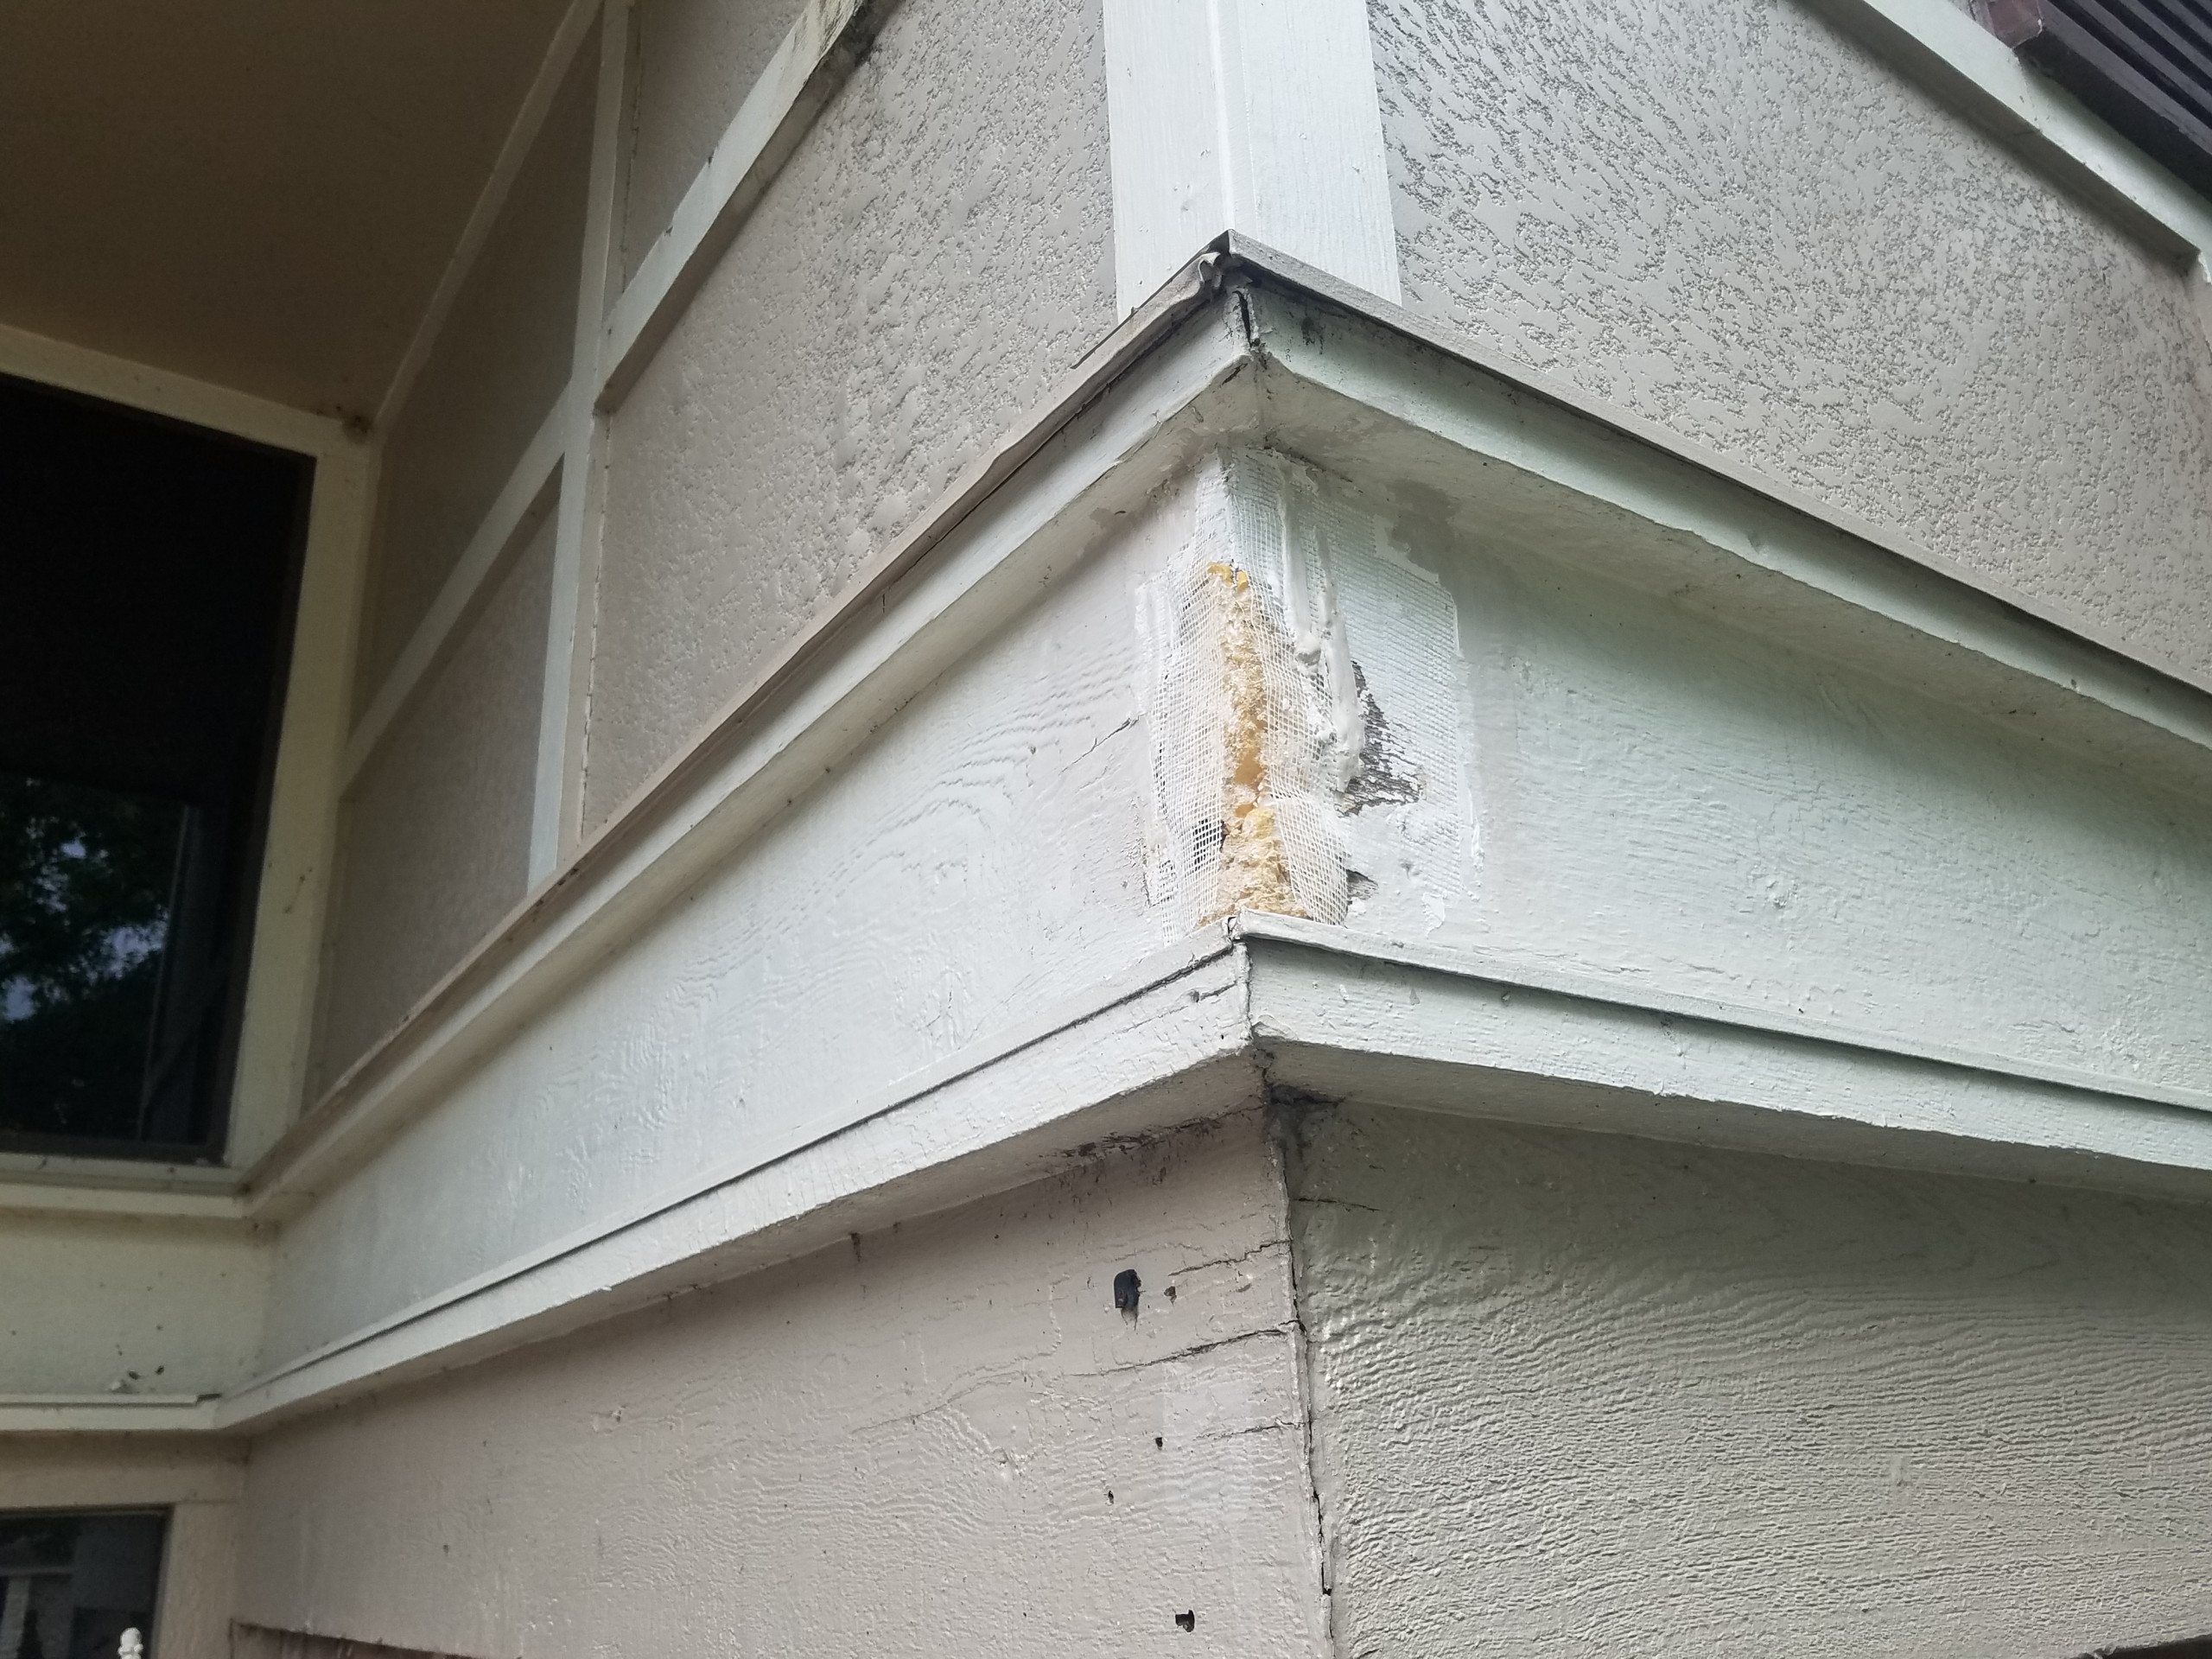 Siding and Soffit Repair